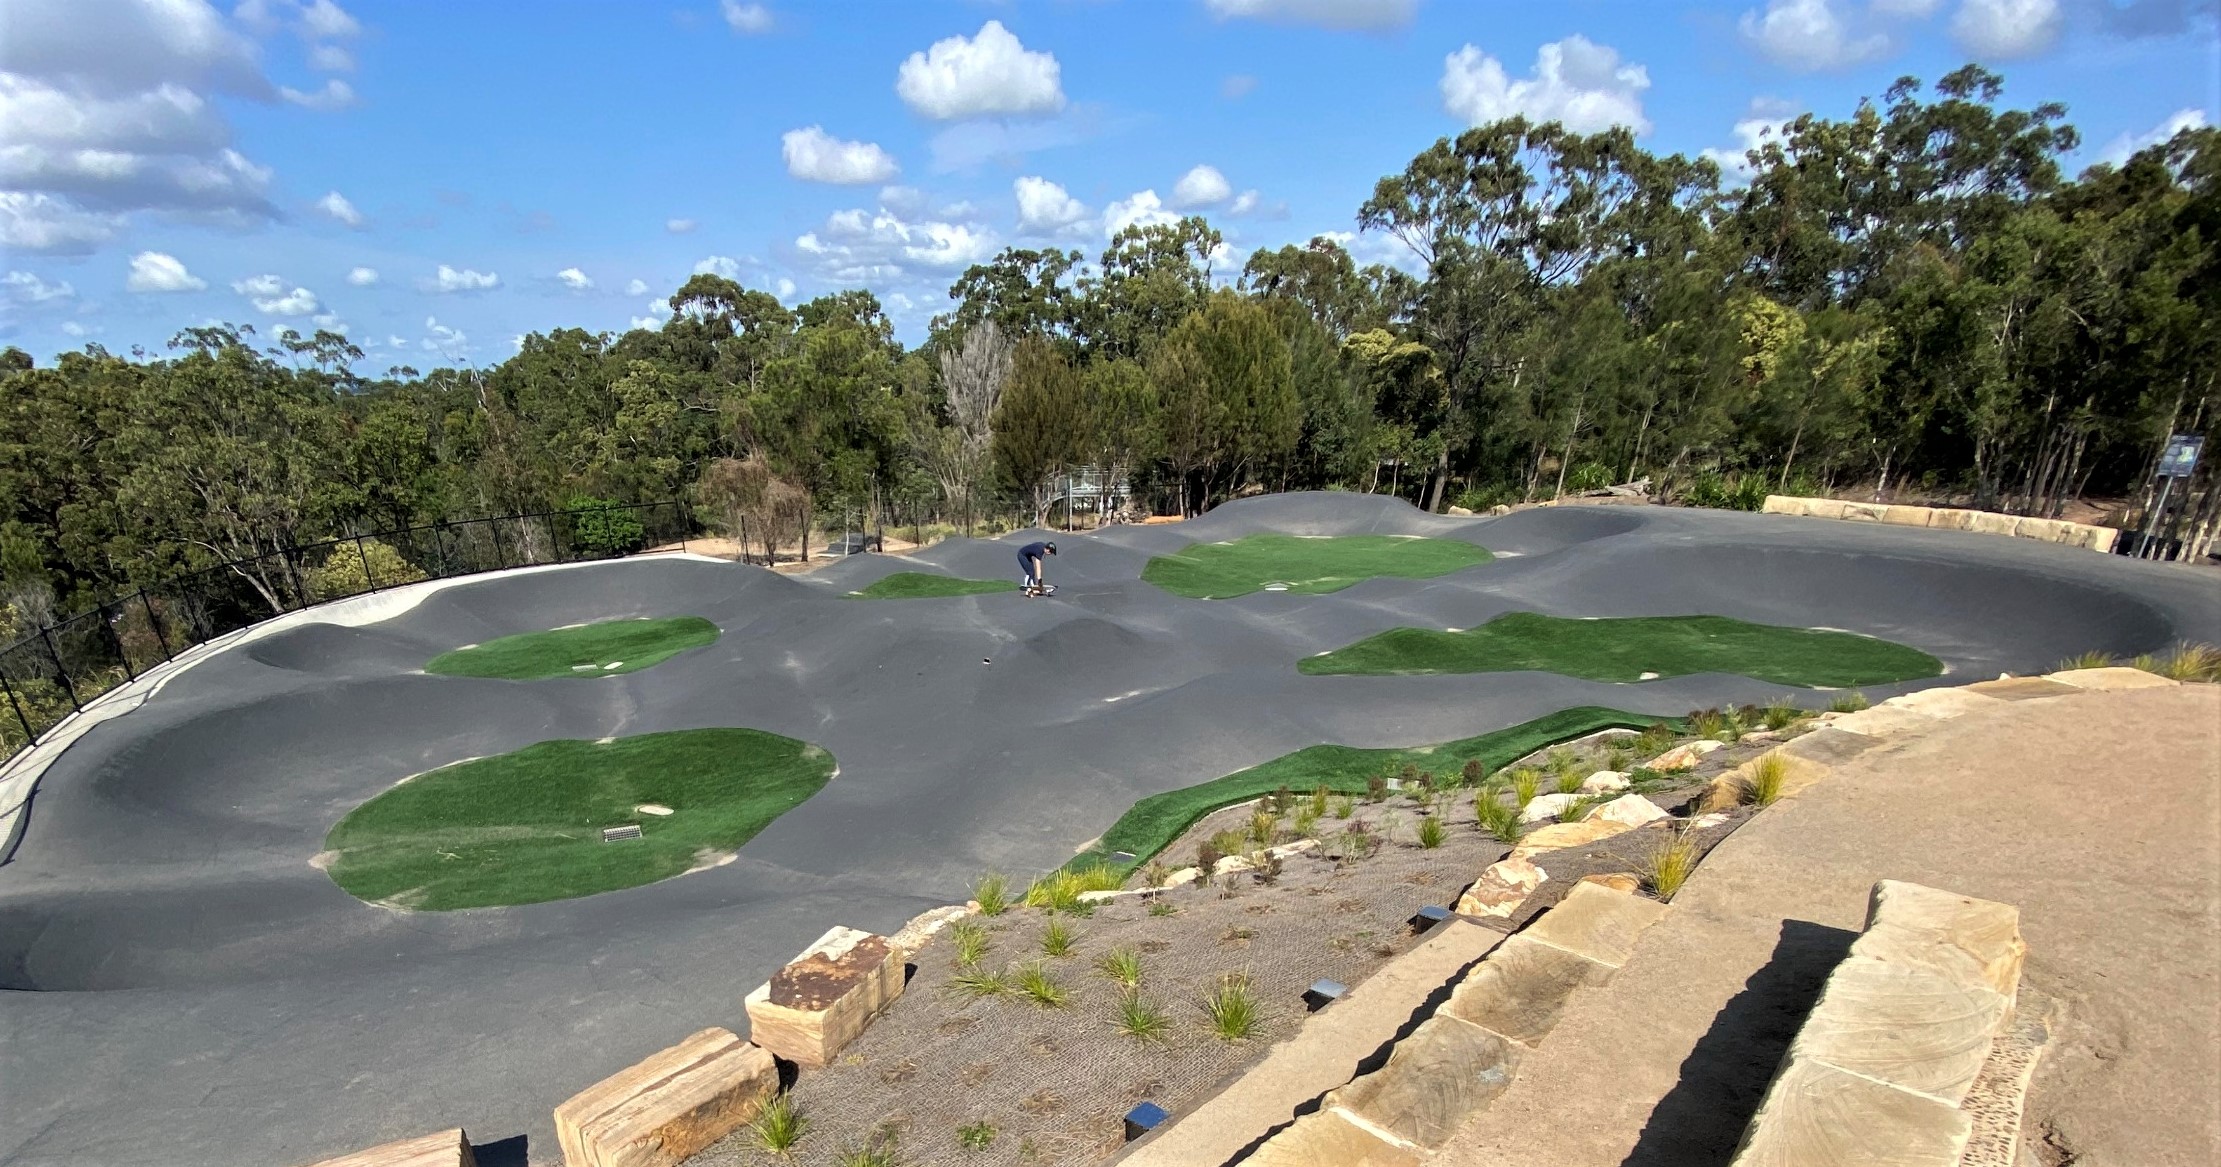 What’s the best spot for town’s first pump track?